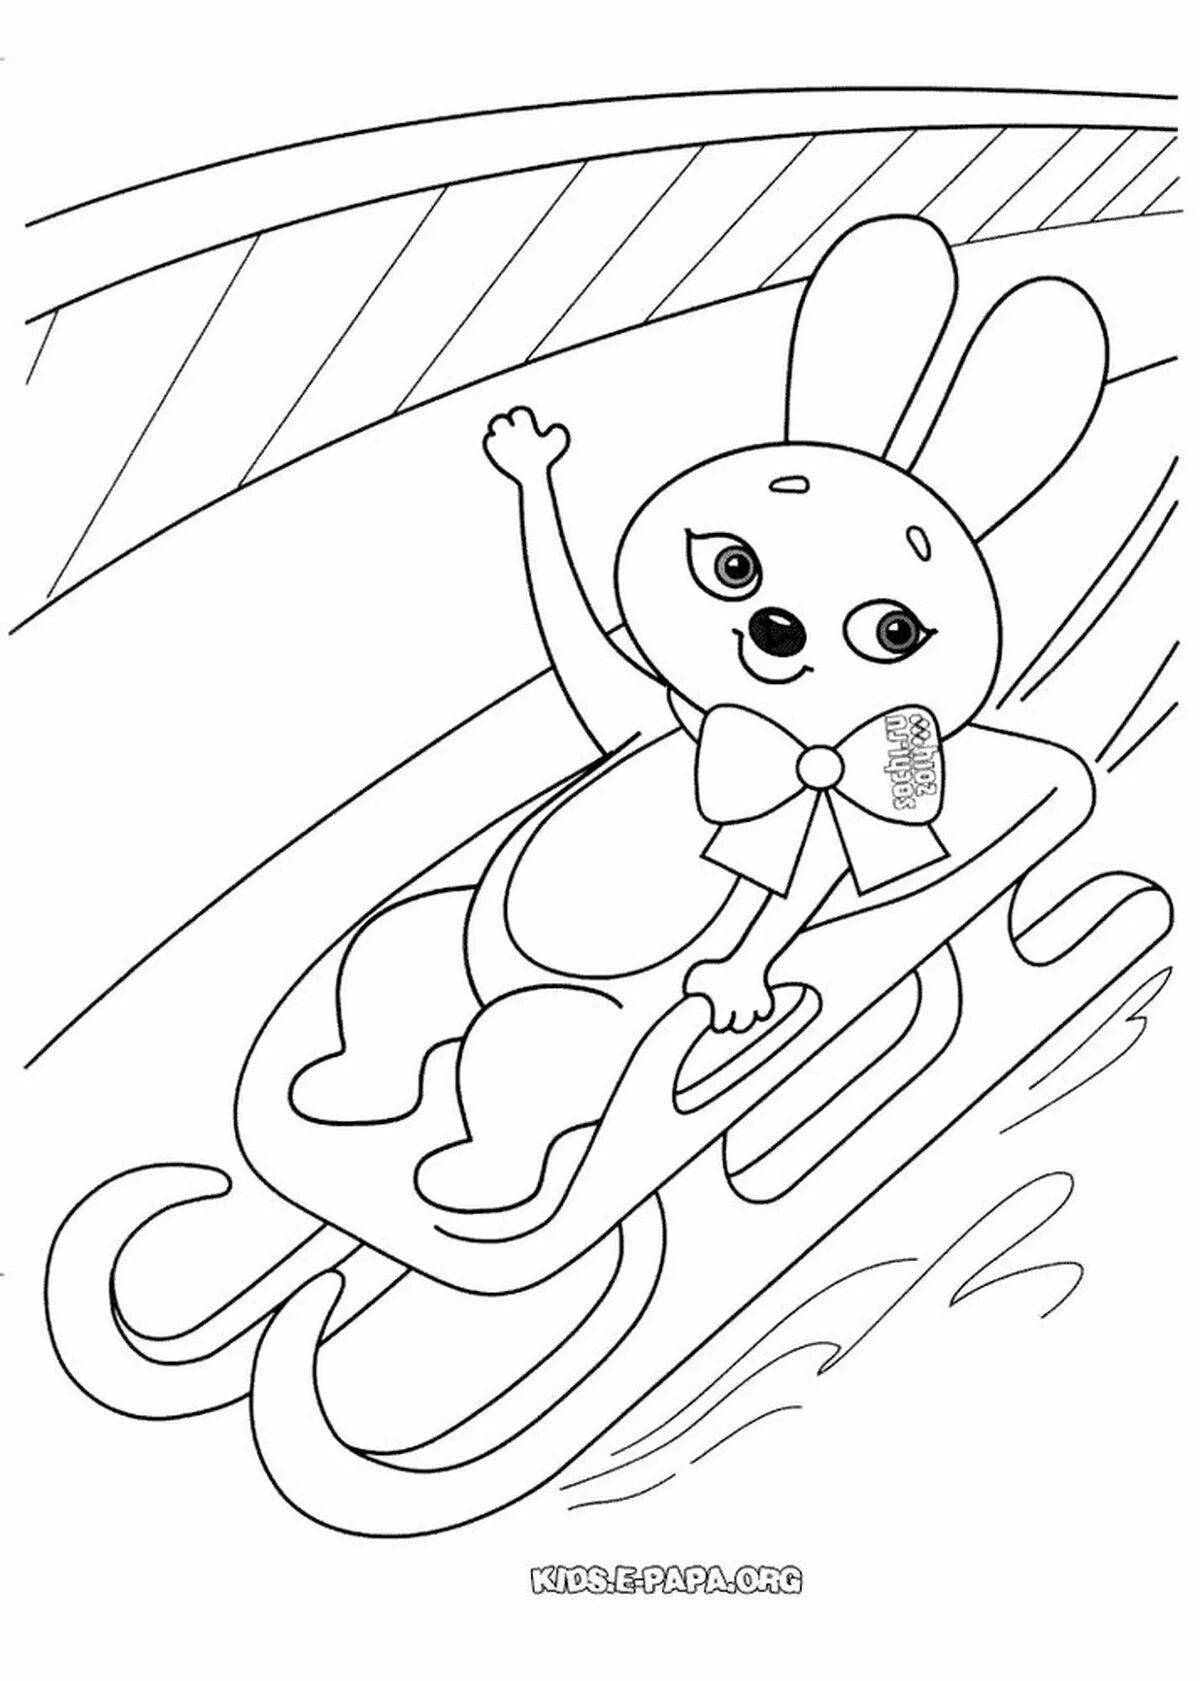 Joyful coloring book winter sports for children 4-5 years old